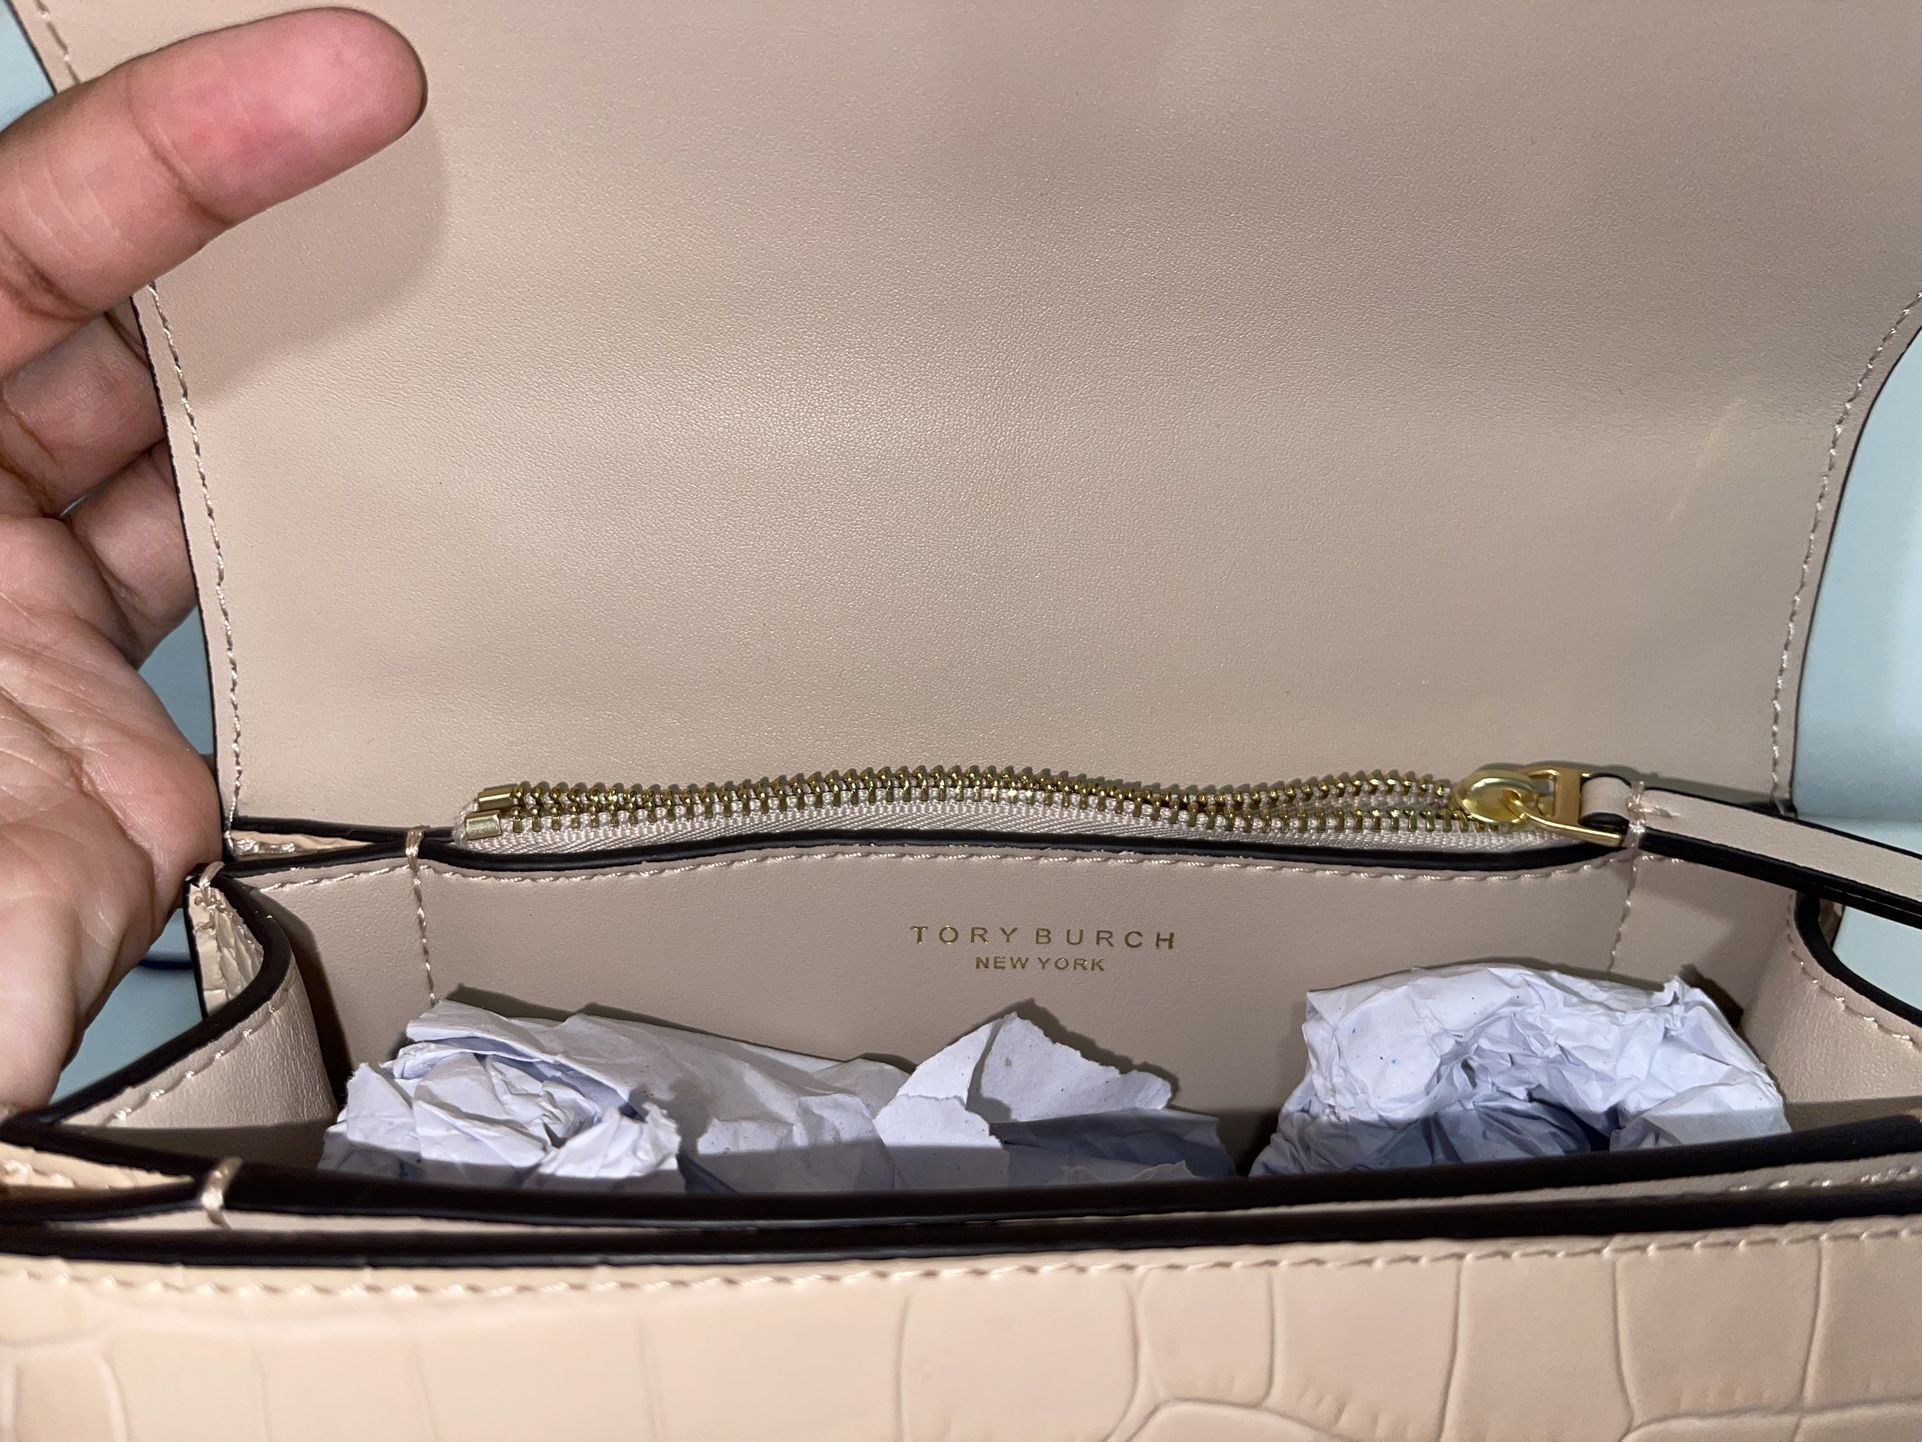 Tory Burch Fleming Convertible Shoulder Bag (Large) for Sale in Gilbert, AZ  - OfferUp